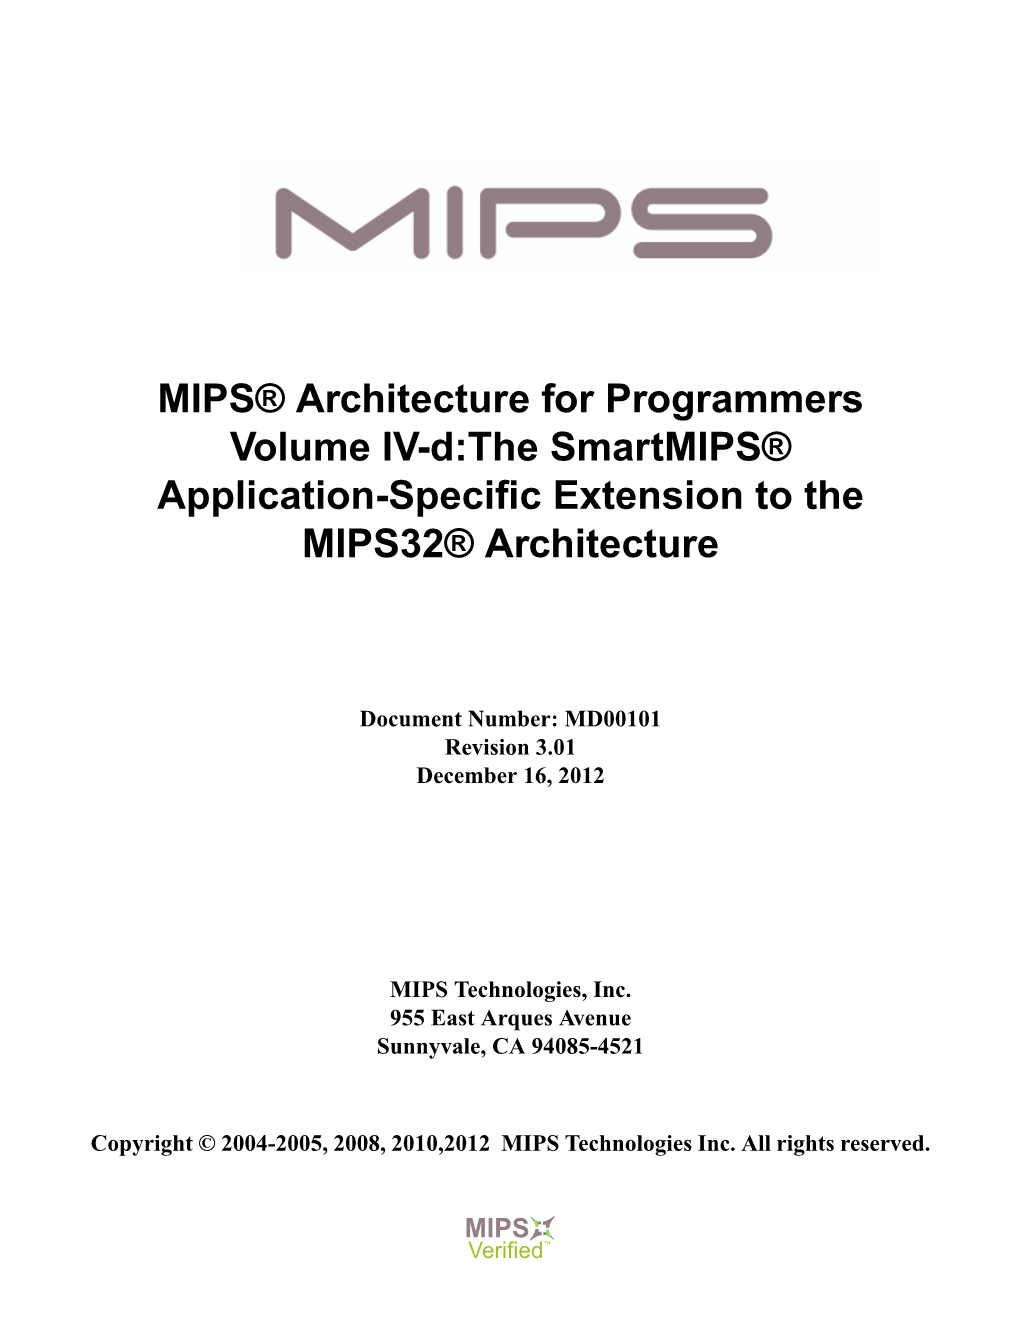 MIPS® Architecture for Programmers Volume IV-D: the Smartmips